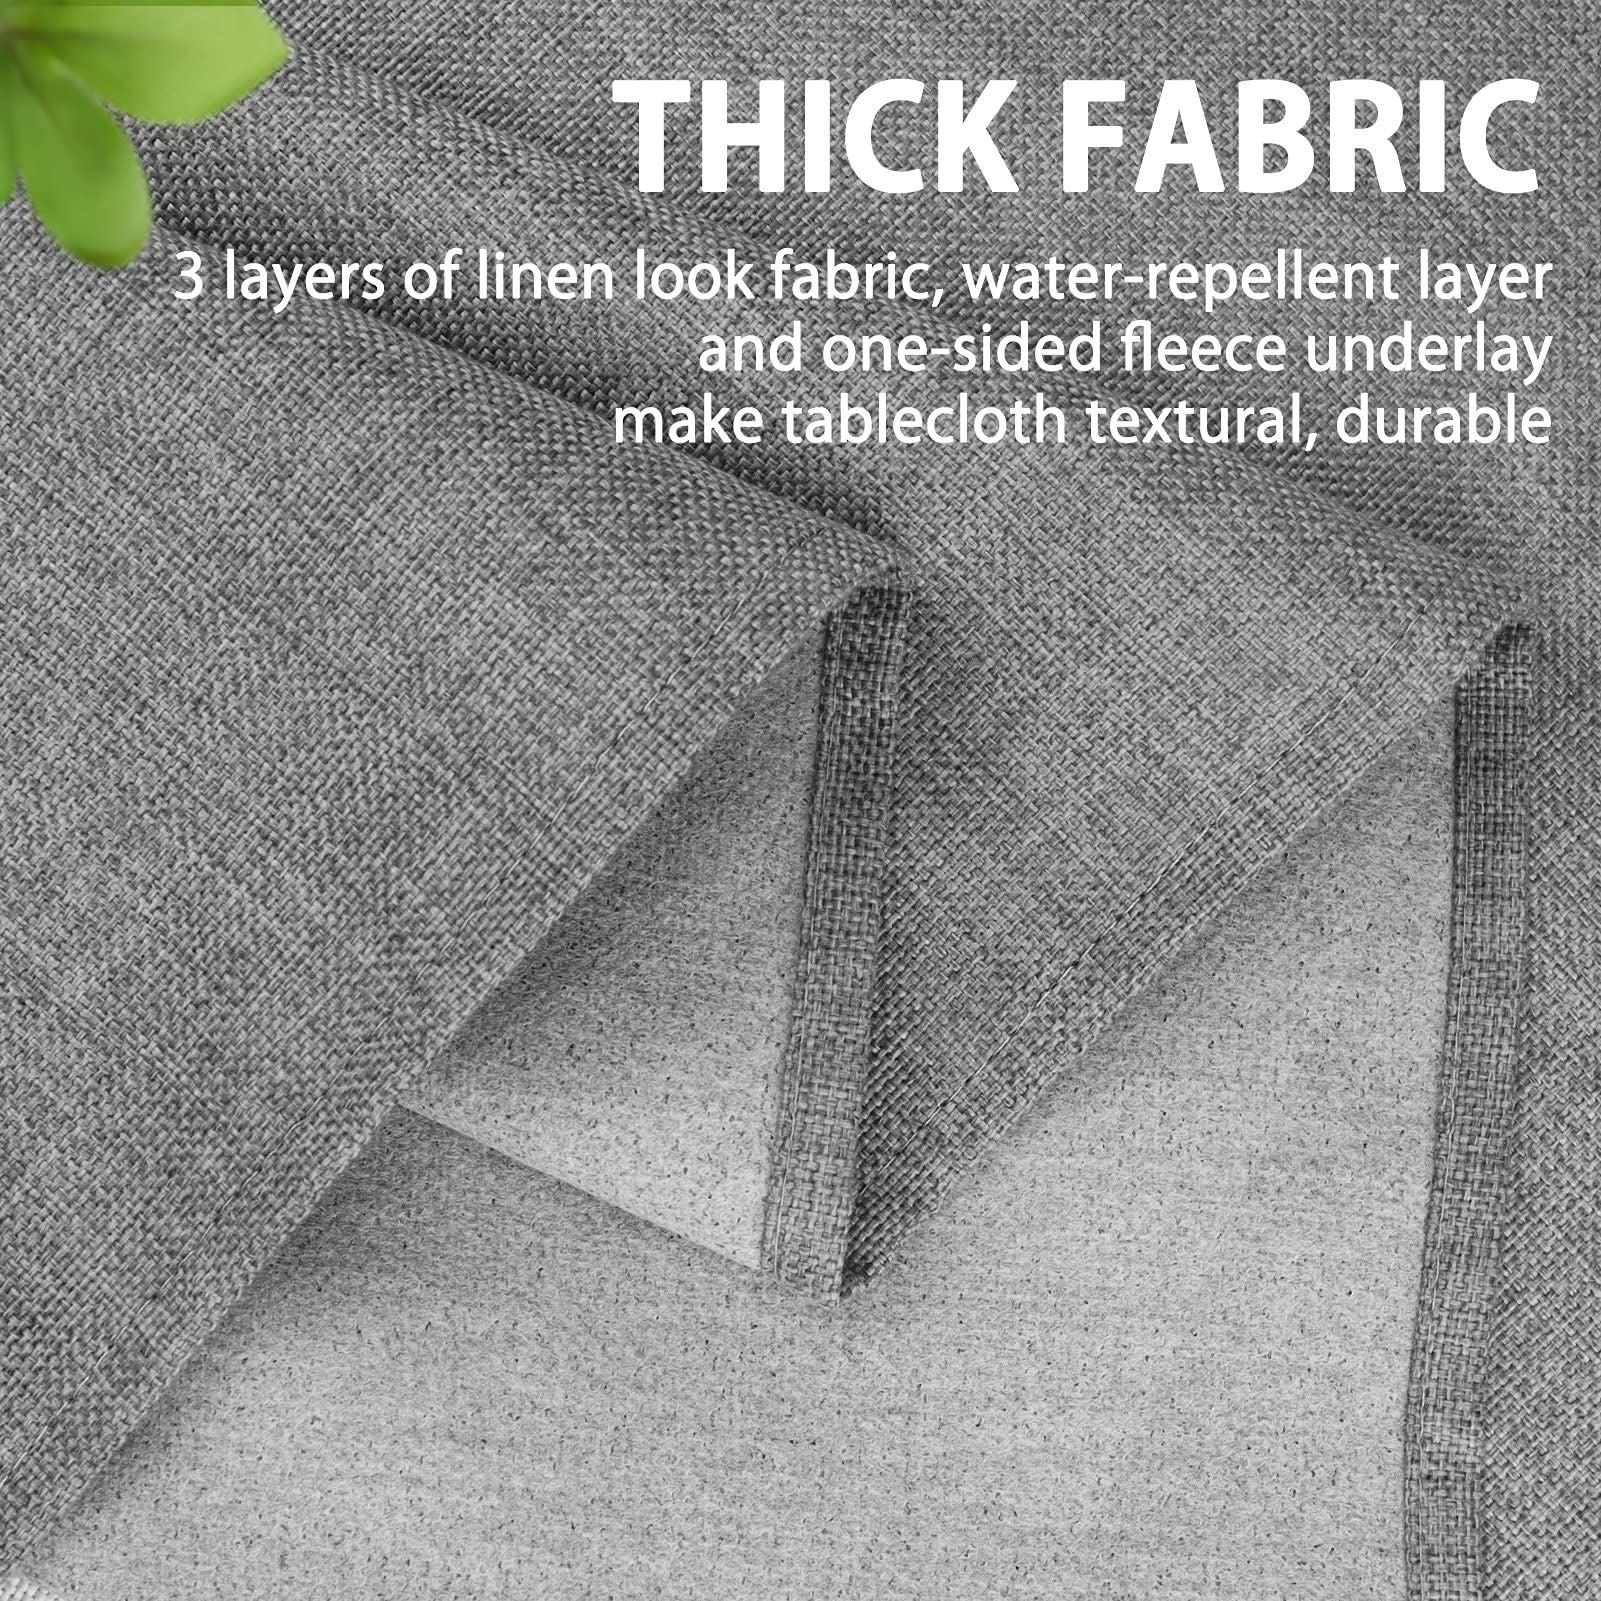 Linen Grey Table Cloth Rectangular Hessian Grey Table Cloths 2m Tablecloth Gray Oblong Tablecloths Stratch Resistant Buffet Outdoor Picnic Decorative Tabletop 54x79in(137x200cm) Light Grey 4